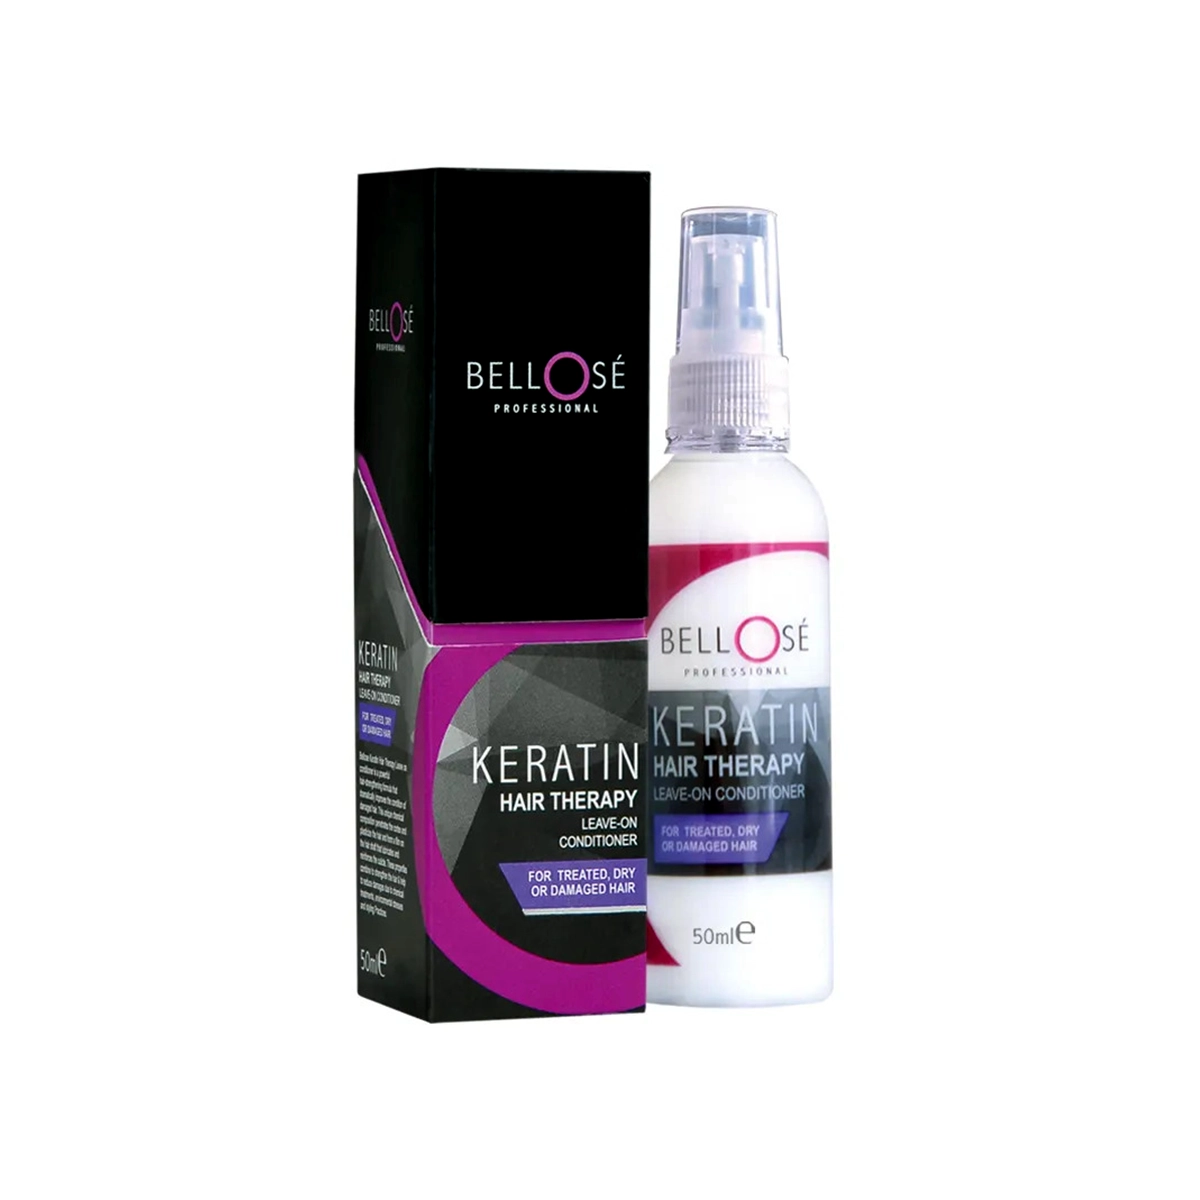 First product image of Bellose Keratin Hair Therapy 50ml